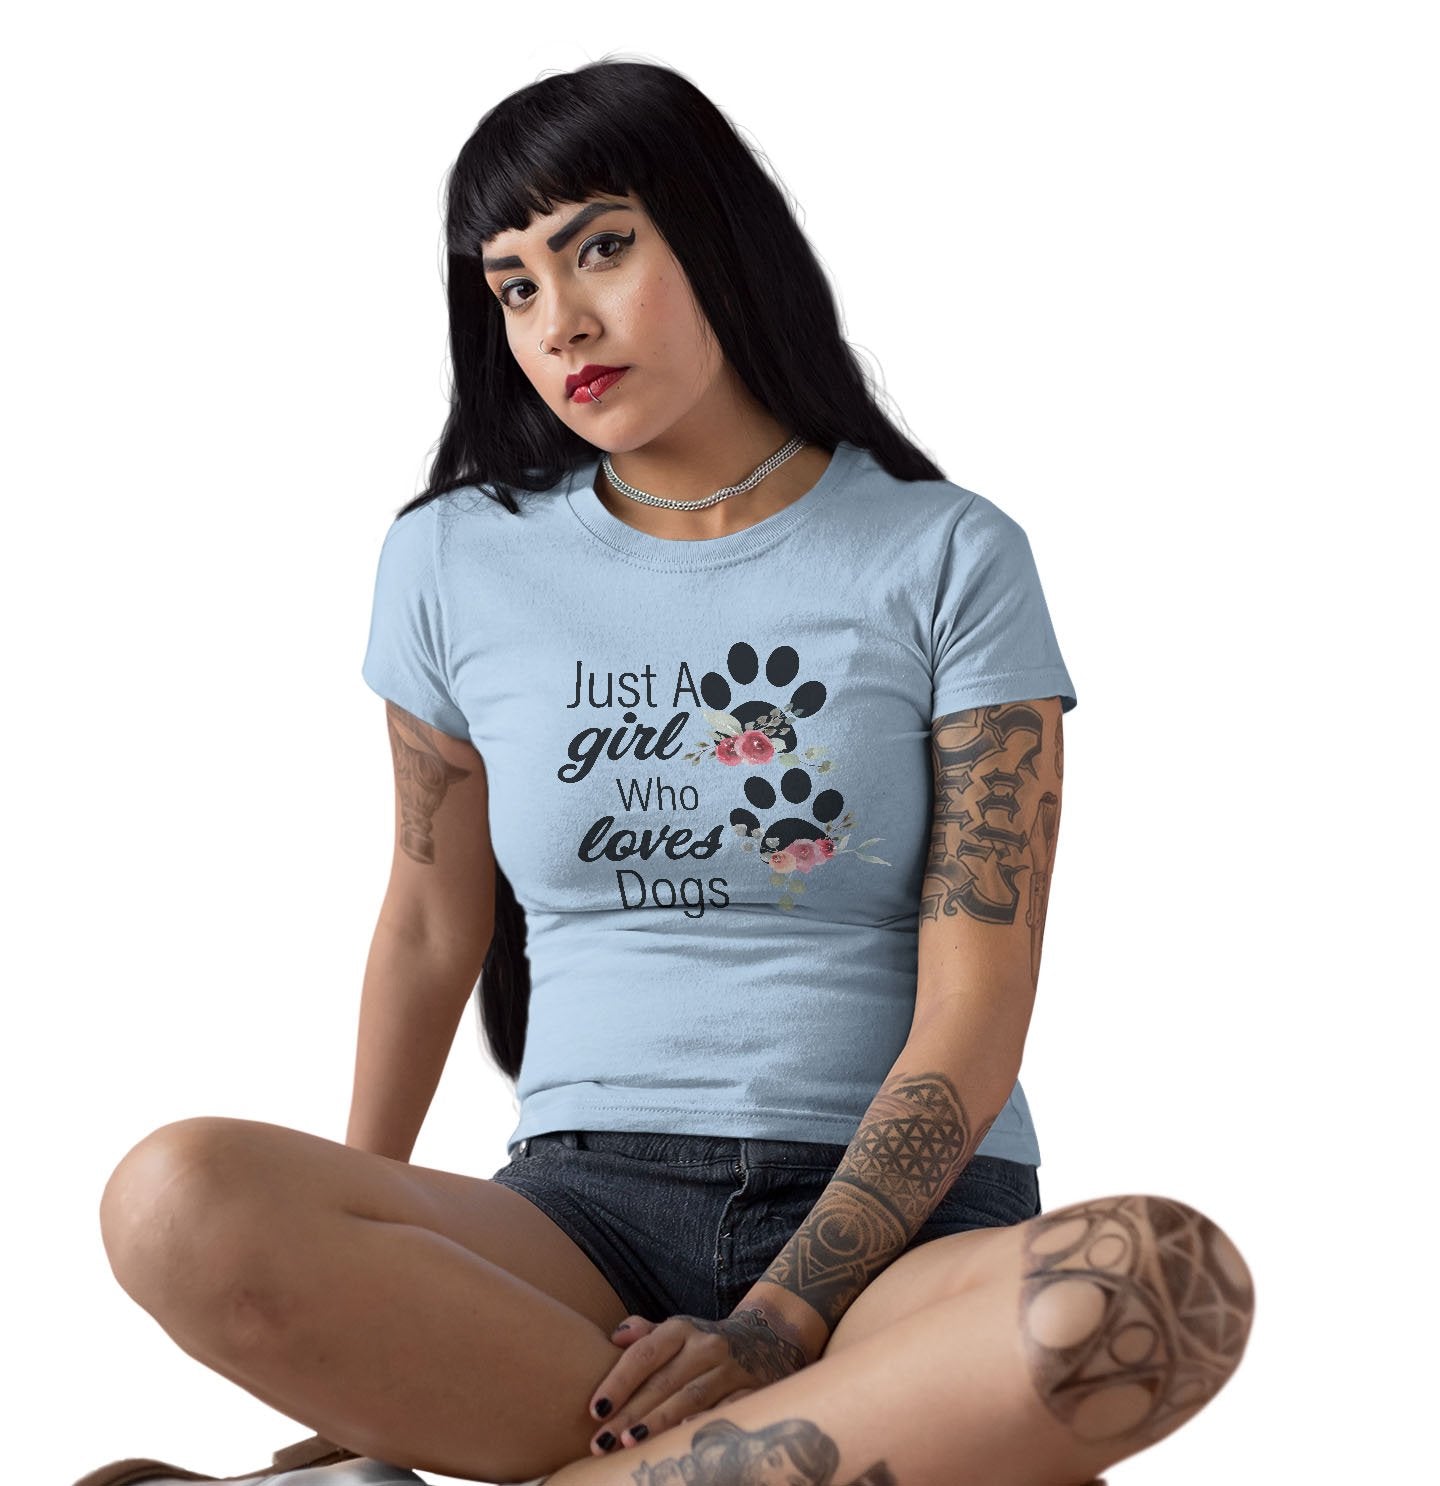 Just A Girl Who Loves Dogs - Women's Fitted T-Shirt